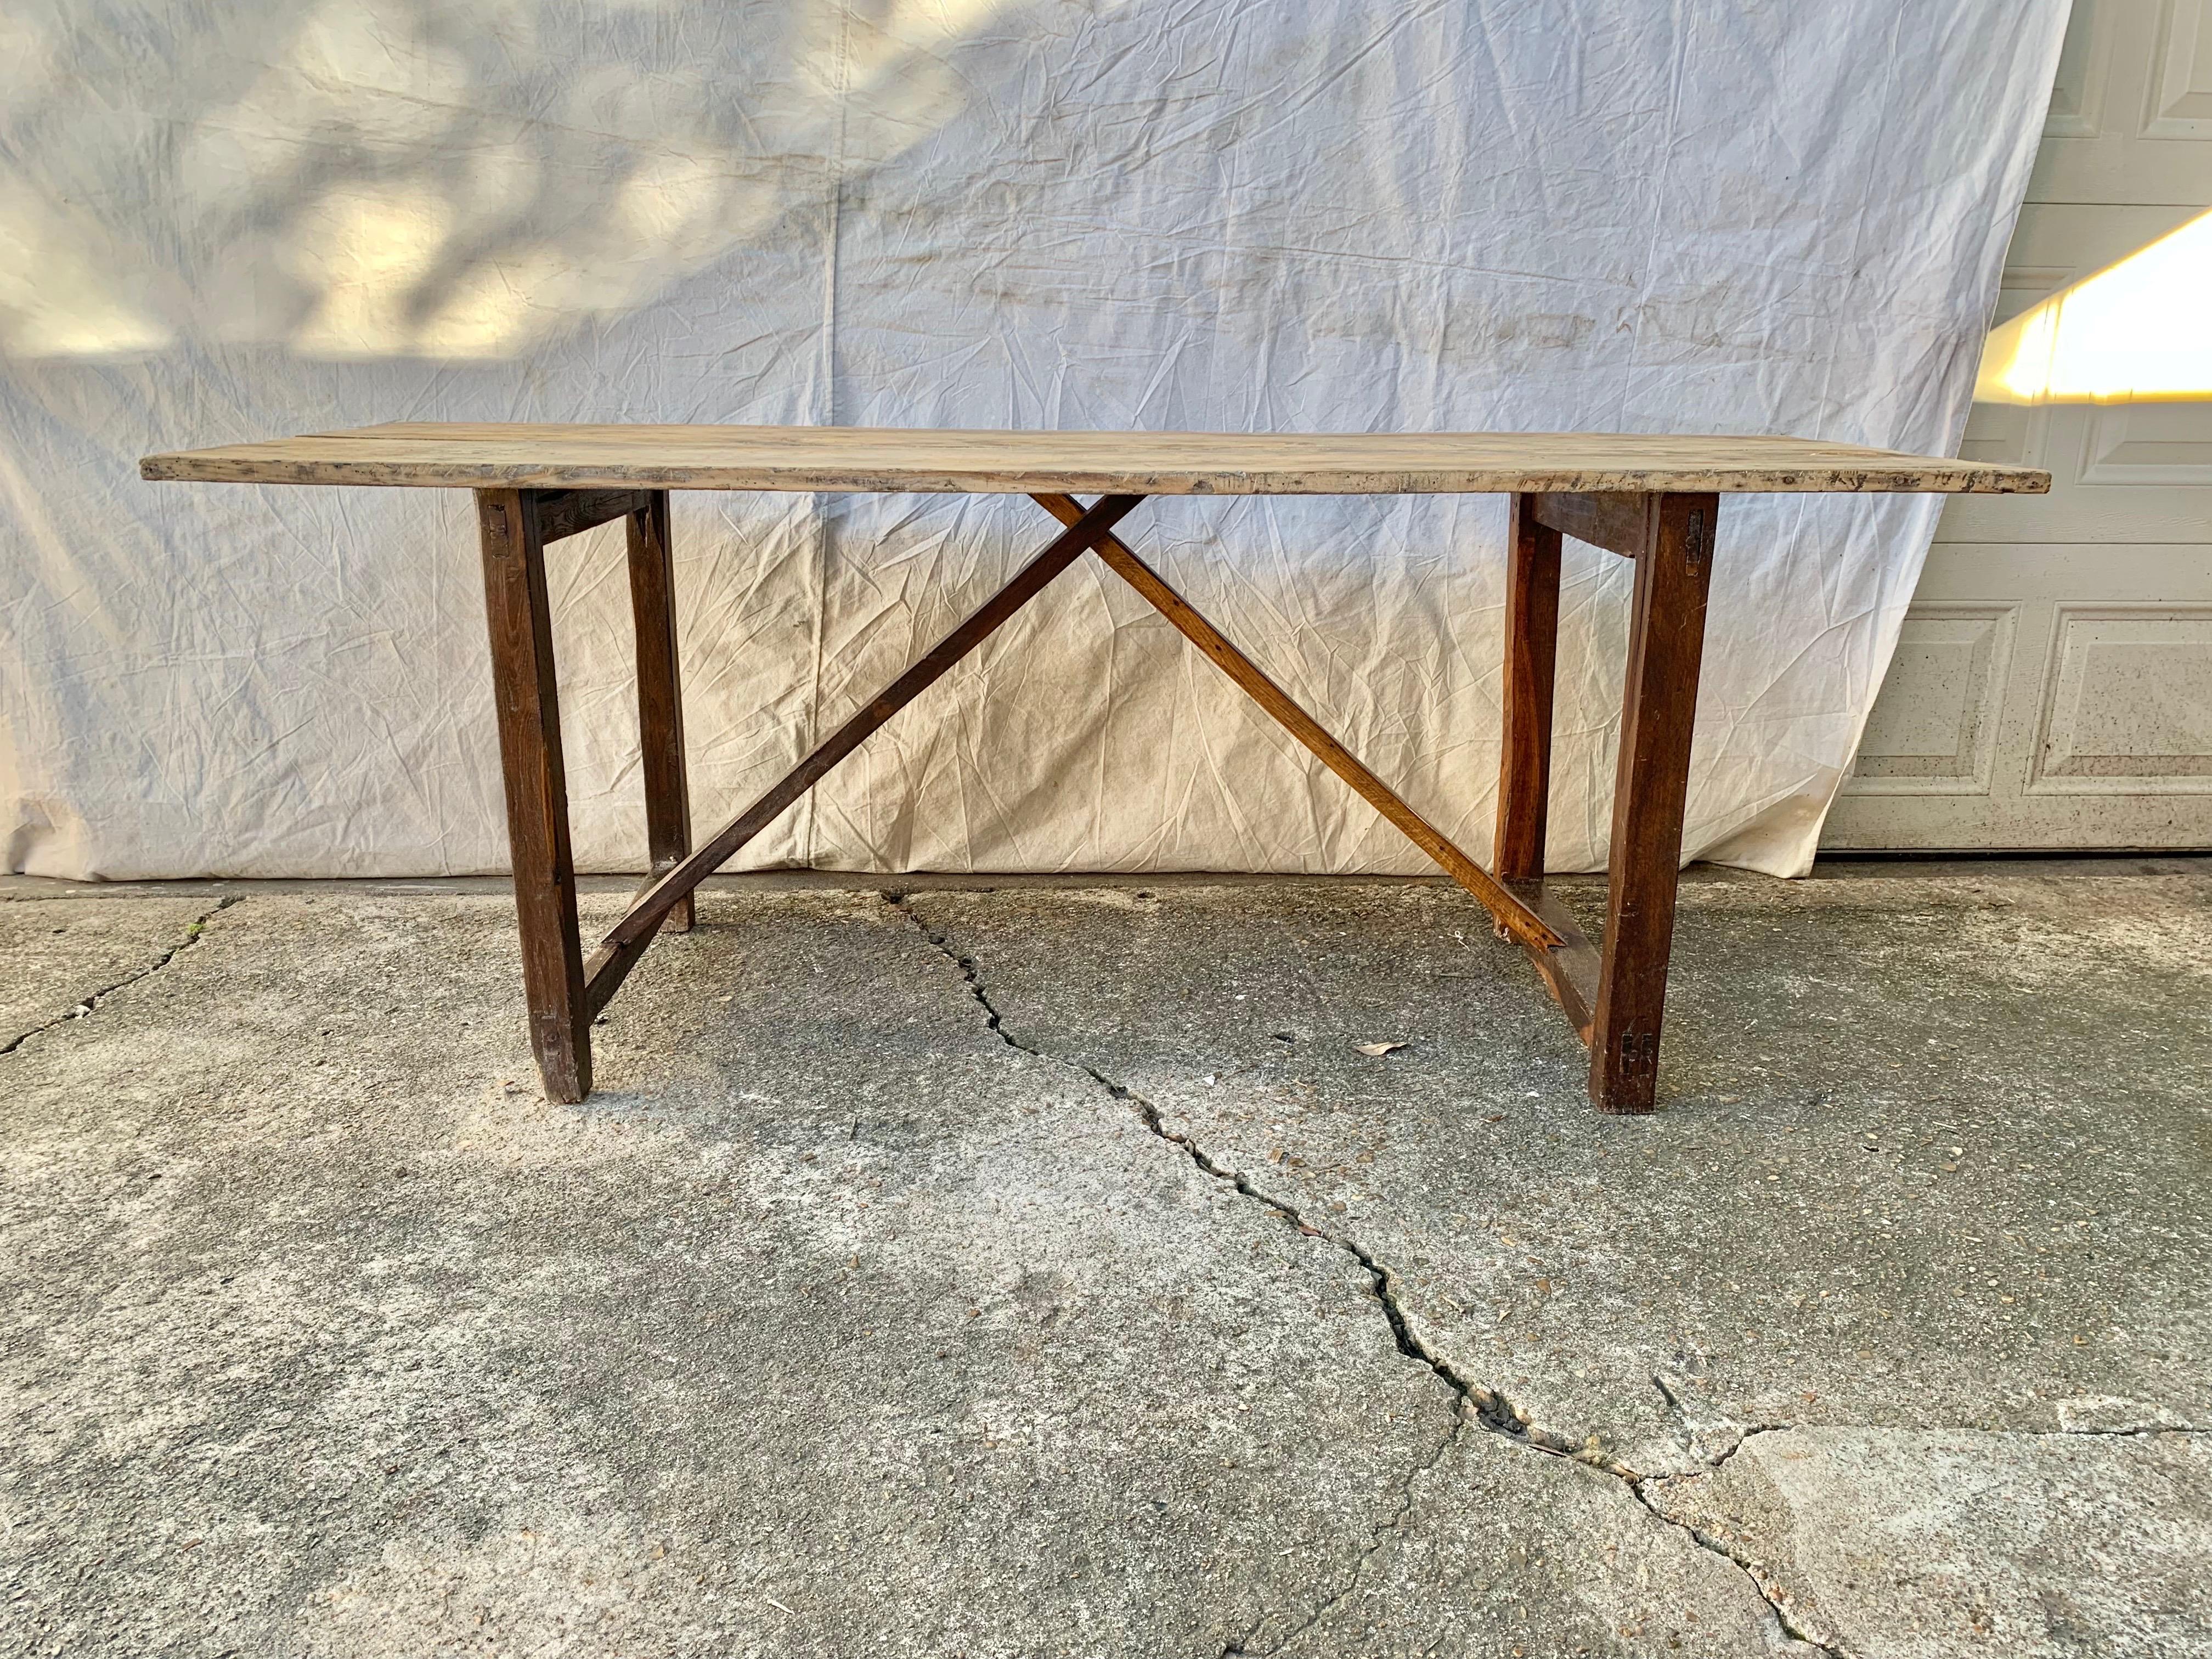 Found in the South of France, this French Trestle Table was crafted from old growth pine by French artisans in the early 1900's. The table features a 1